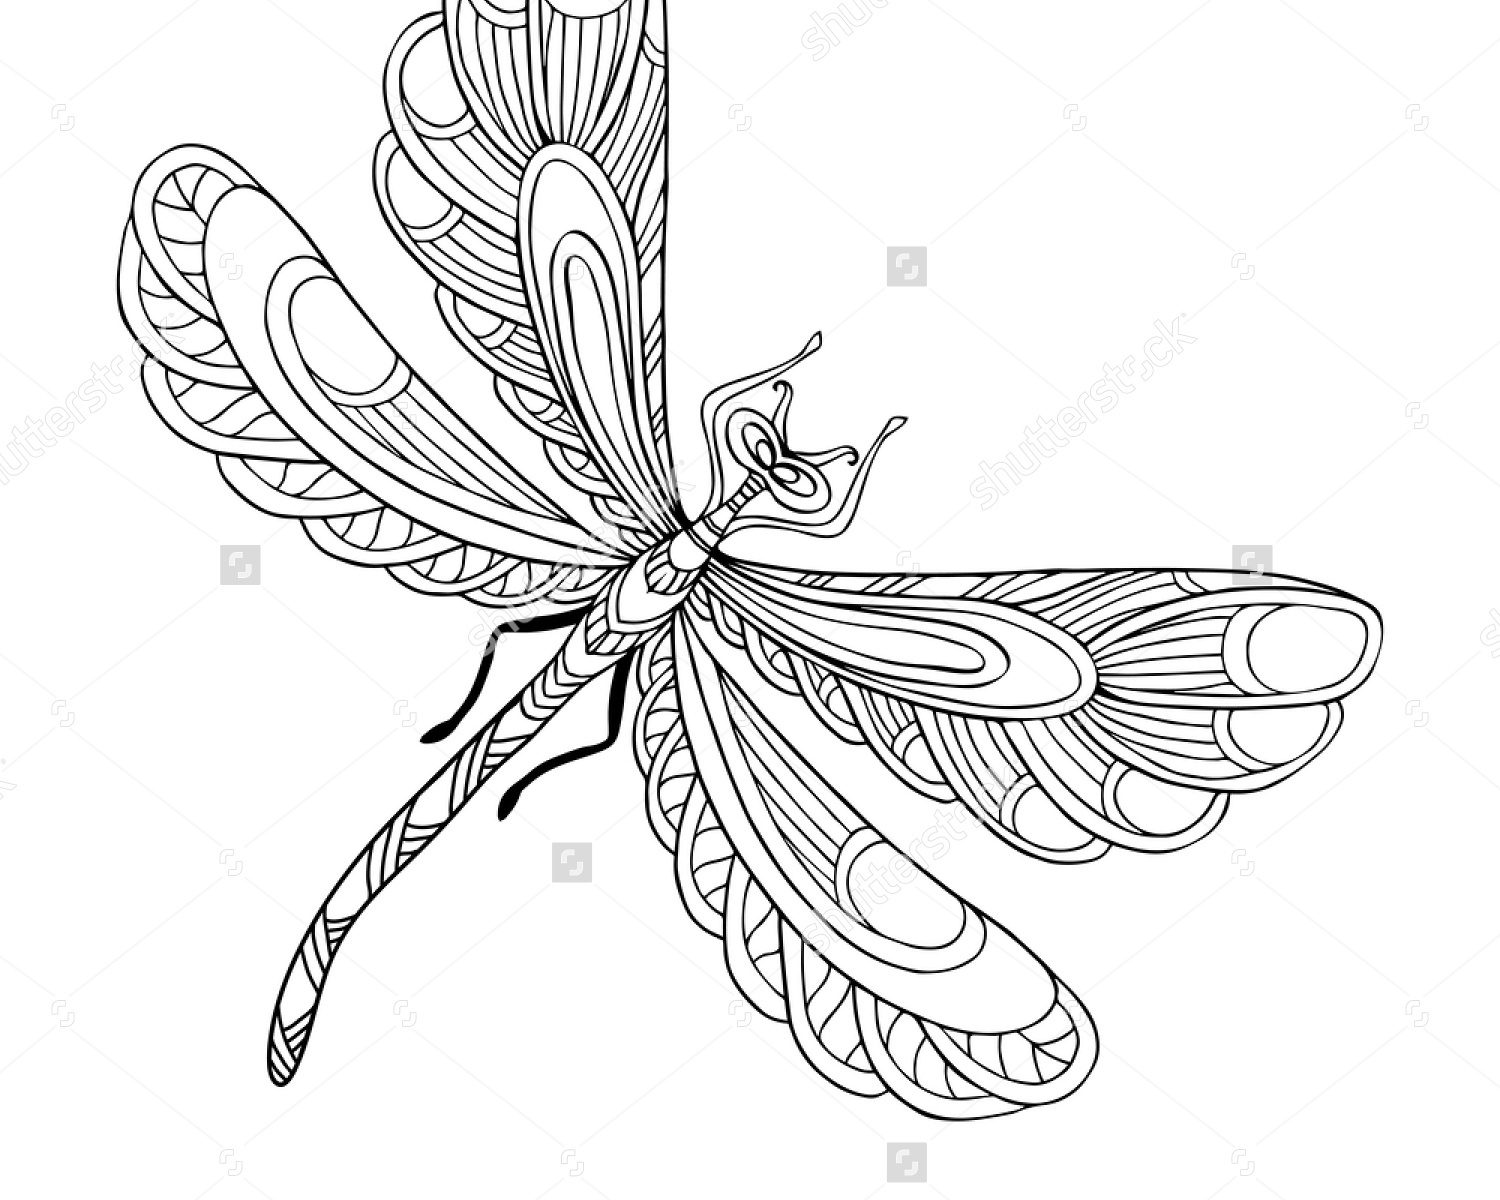 Mosaic Dragonfly Coloring Pages Coloring Pages